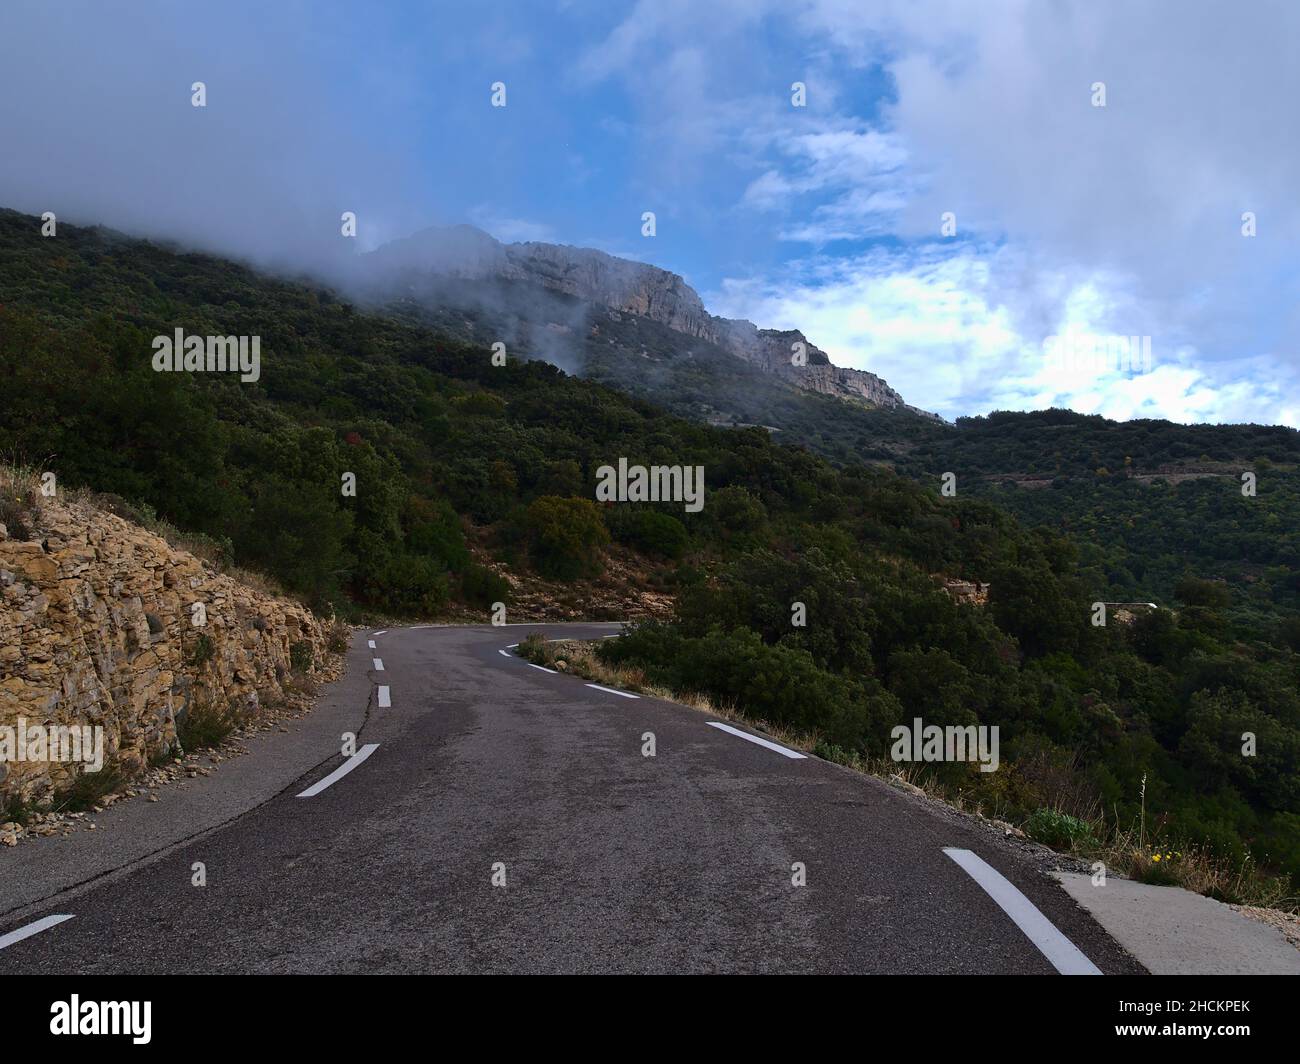 View of curvy mountain road D2 in Massif de la Sainte-Baume in Provence, France on cloudy day in autumn surrounded by forest. Stock Photo